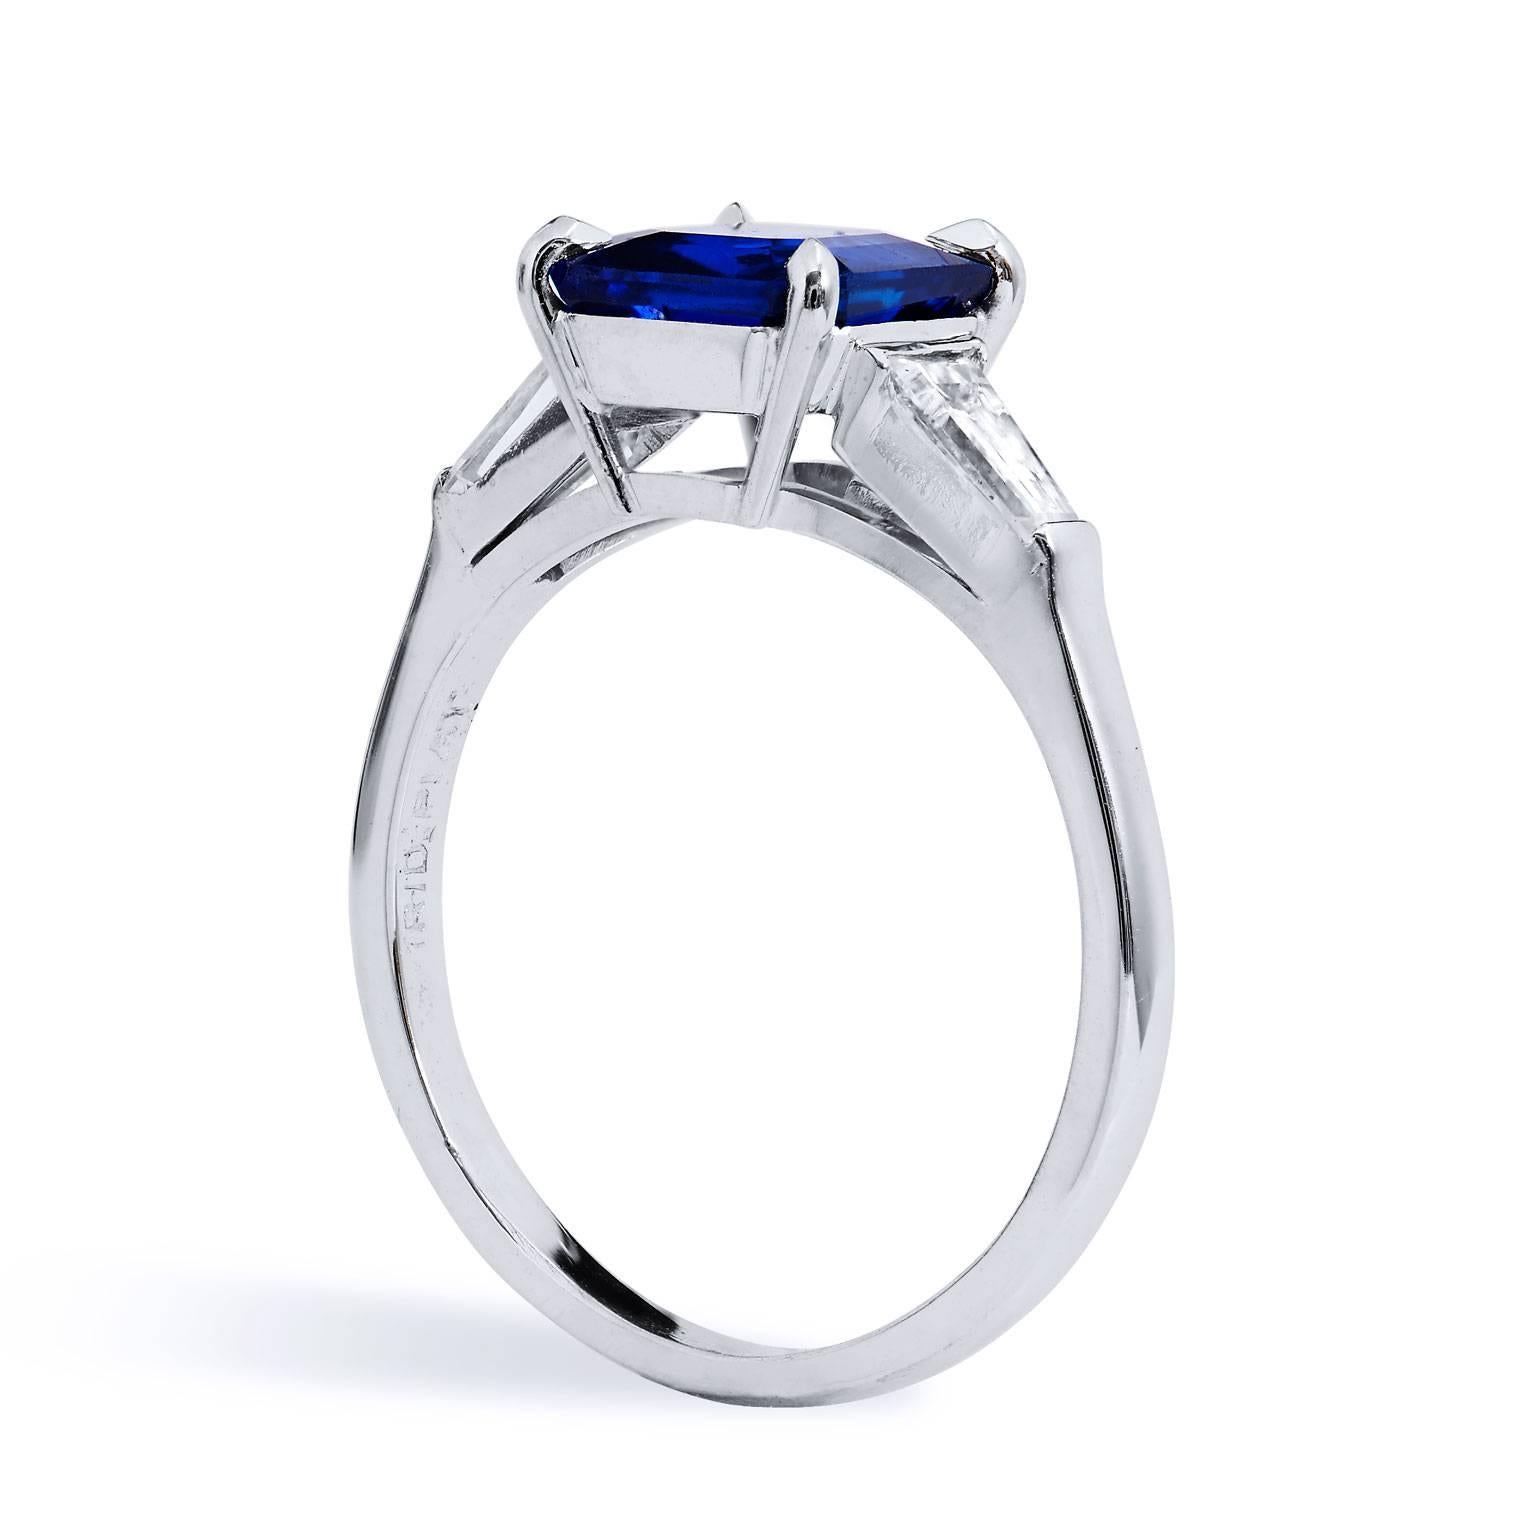 Estate GIA Certified 2.00 Carat Square Cut Blue Sapphire & Diamond Platinum Ring

Traditionally, sapphire symbolizes nobility, truth, sincerity, and faithfulness. It has decorated the robes of royalty and clergy members for centuries. Its